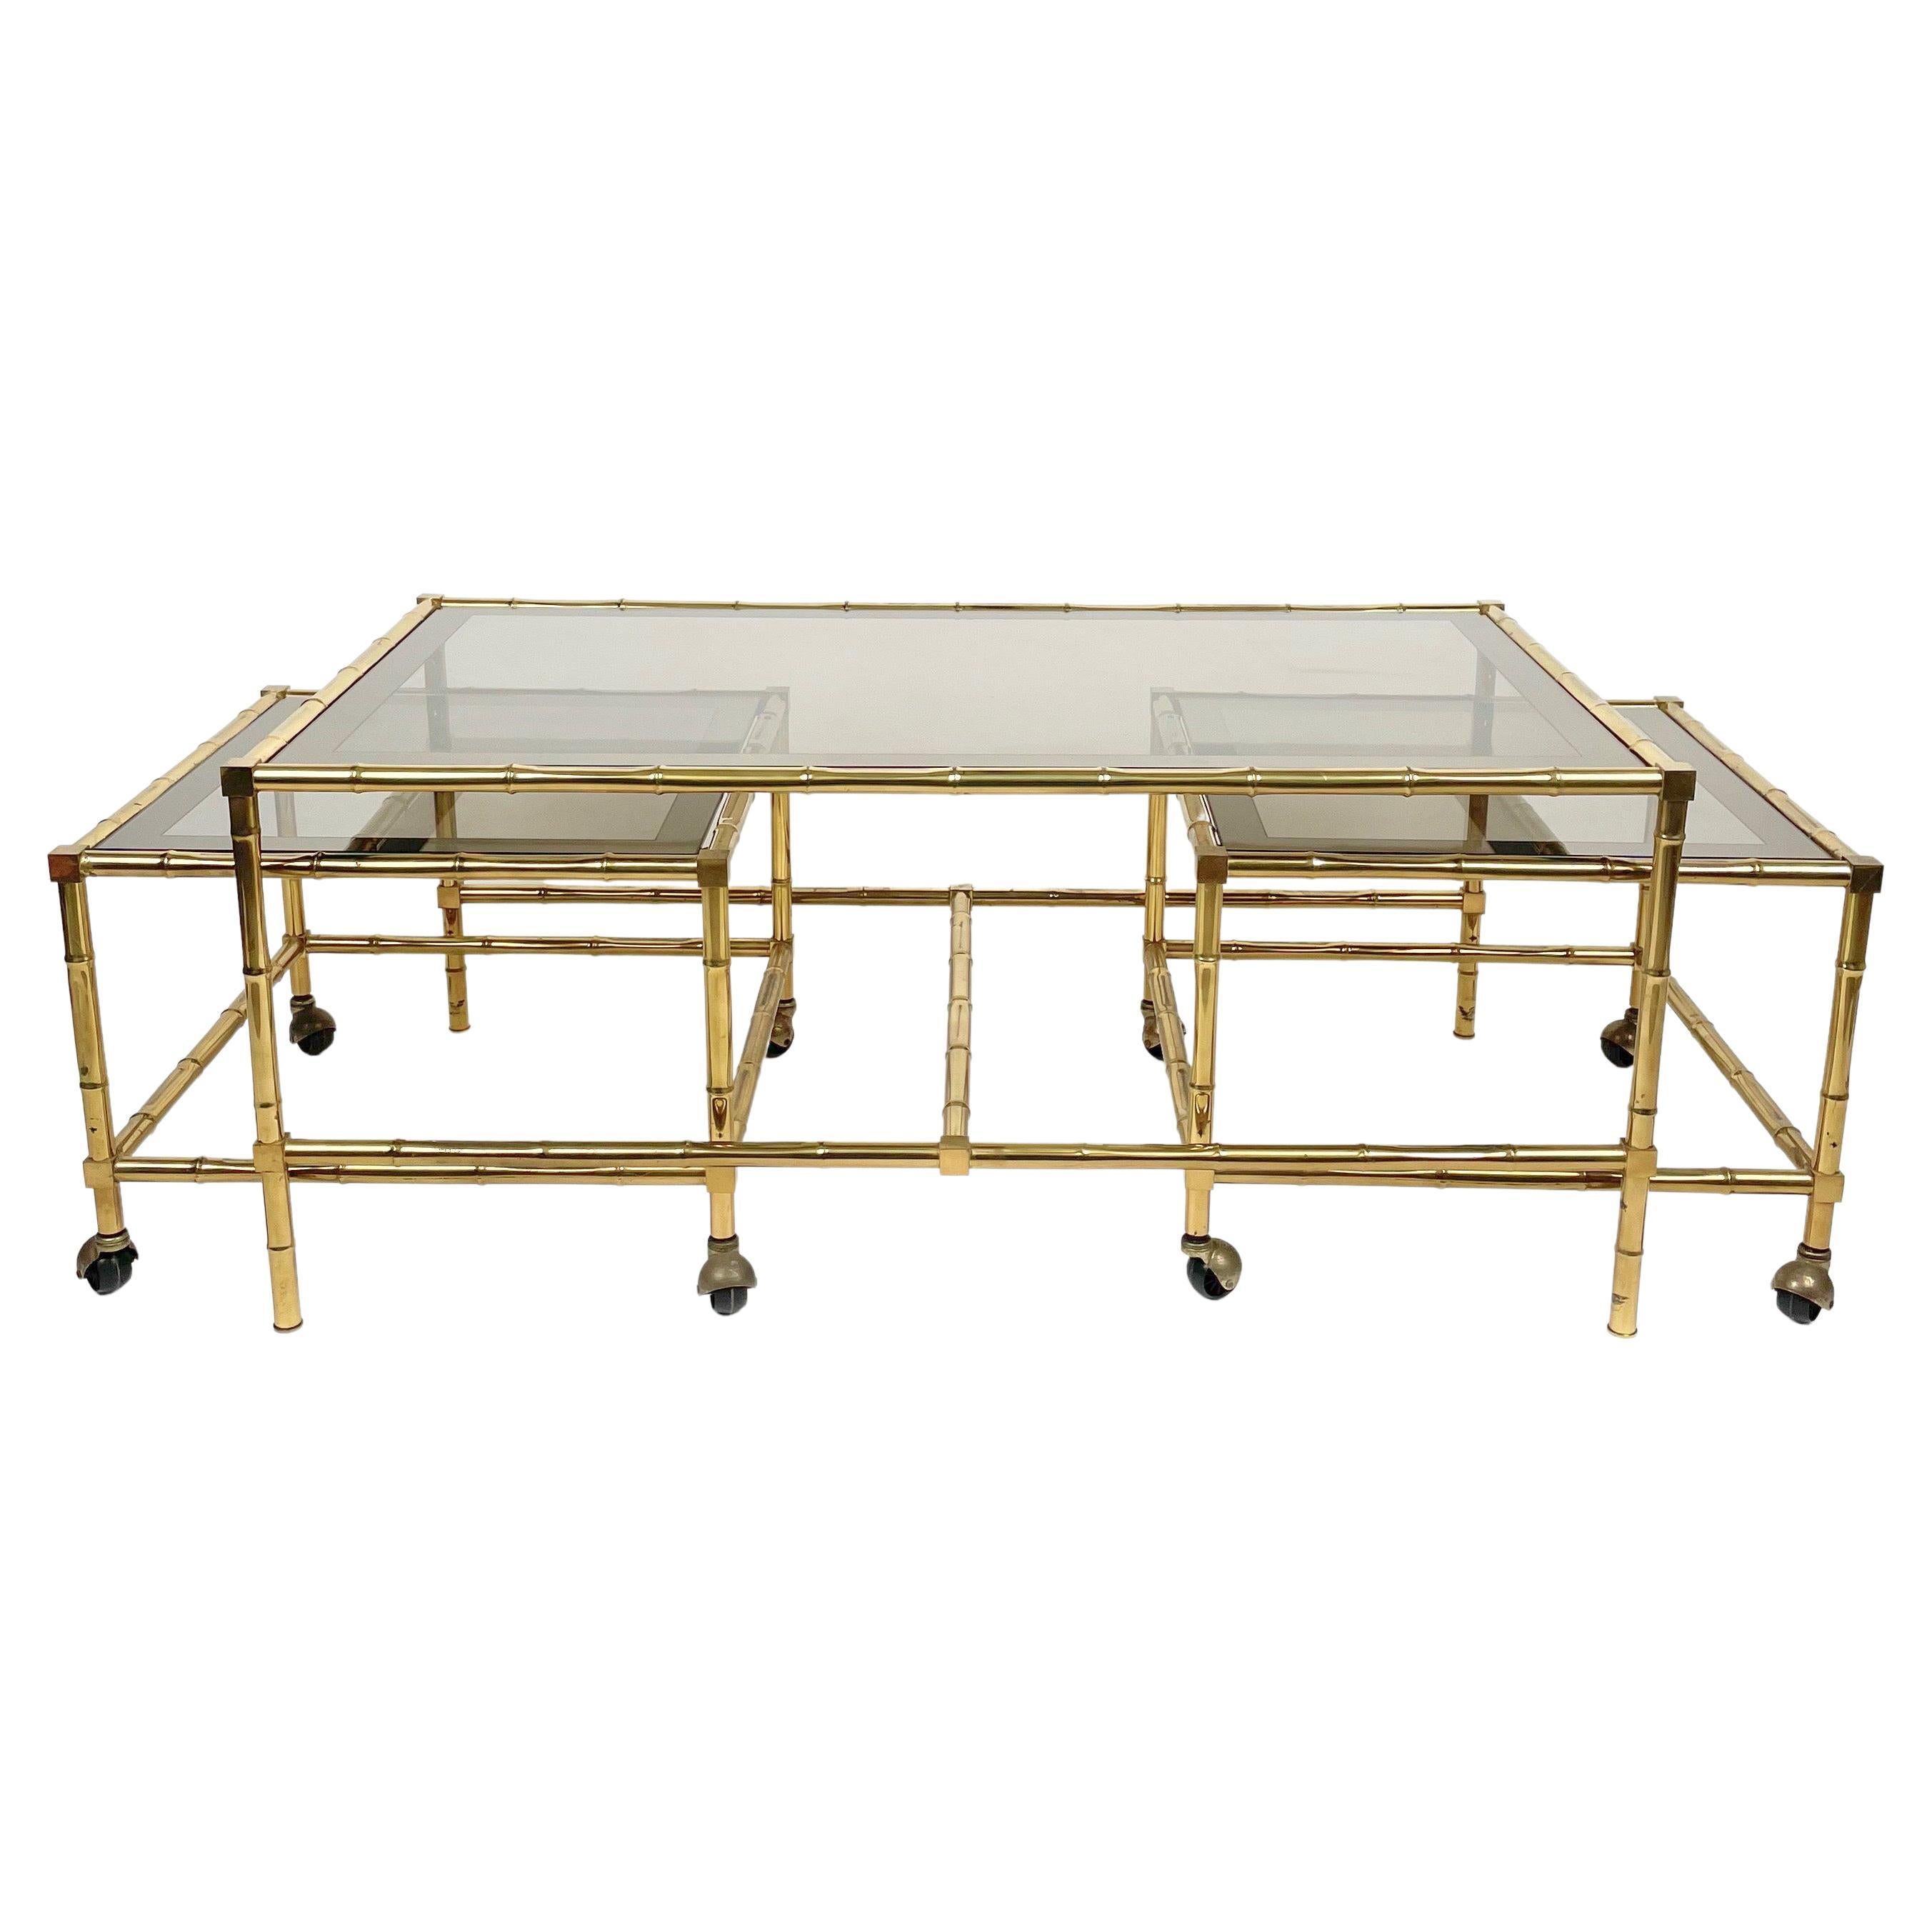 Set of Nesting Coffee Table and Cart in Brass Faux Bamboo and Glass, Italy 1960s